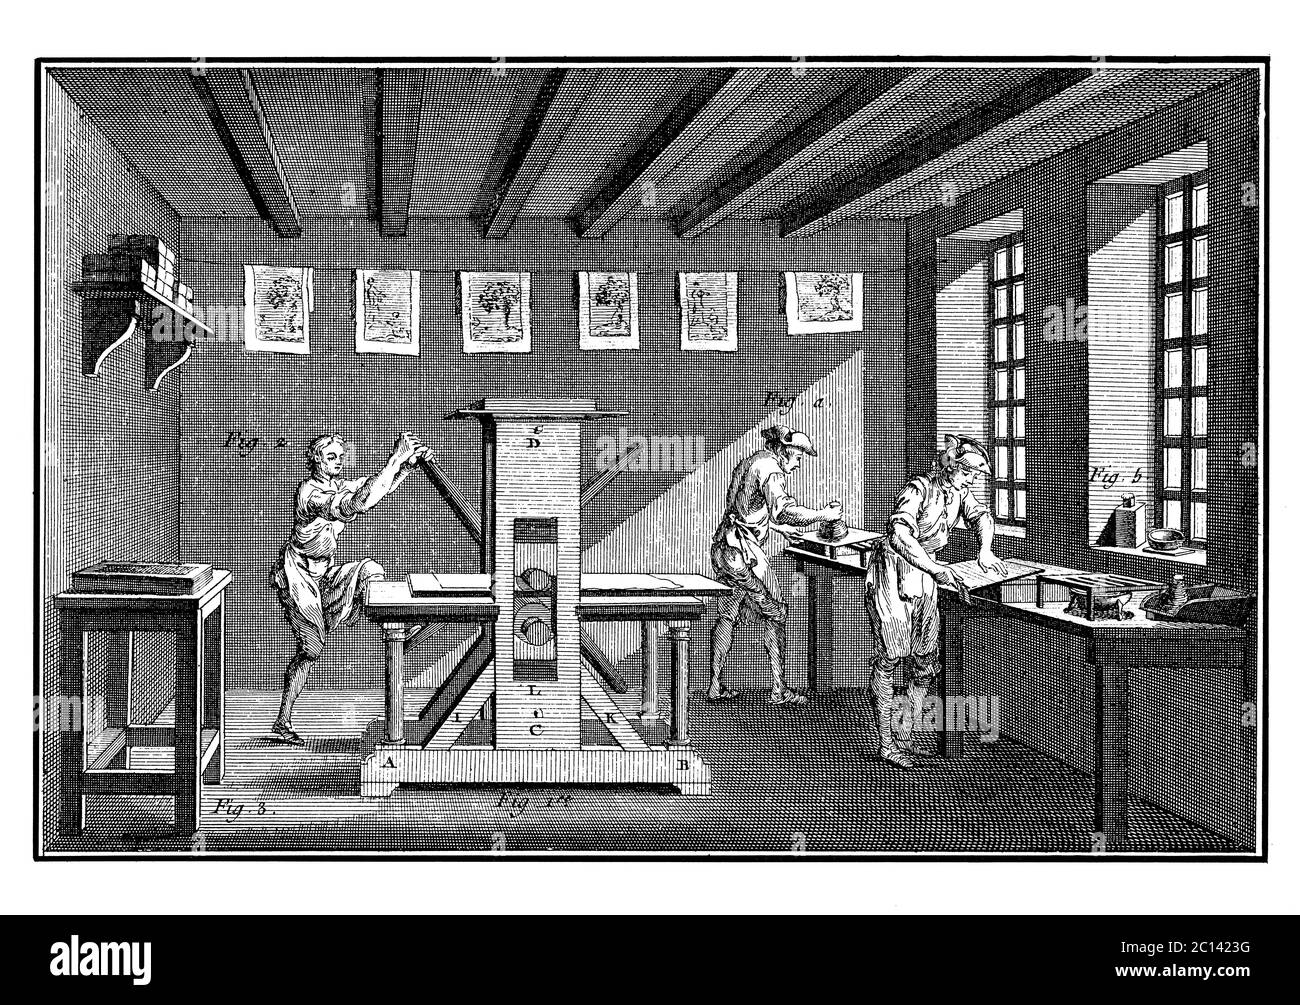 18th century illustration of press printing -ink transferring from the surface of the type to the paper. Published in A Diderot Pictorial Encyclopedia Stock Photo